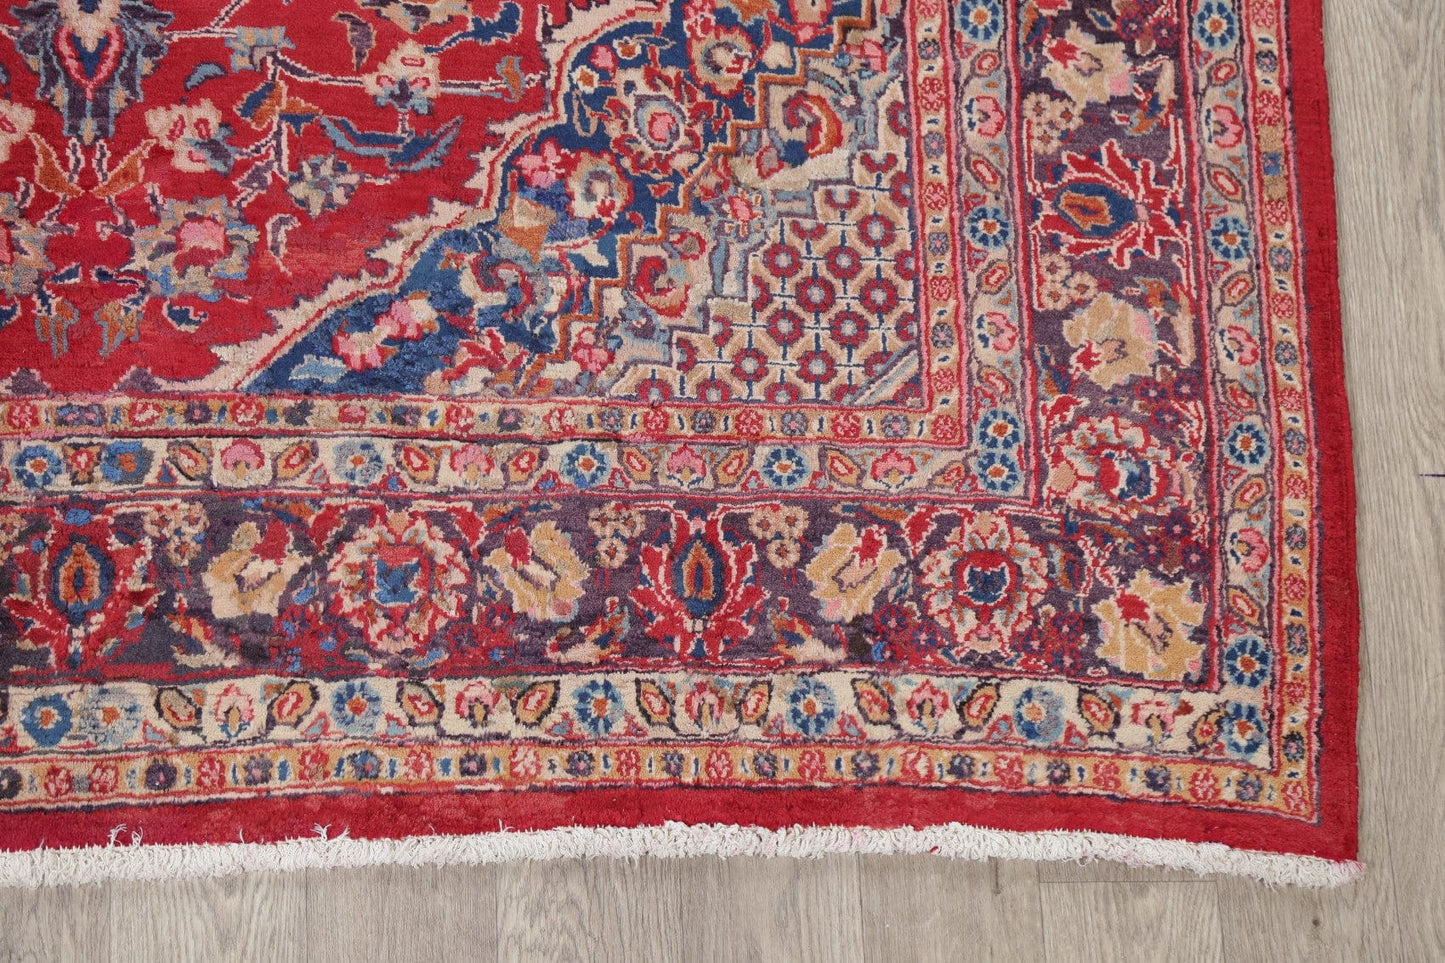 Vintage Floral Red Mashad Persian Area Rug 7x10